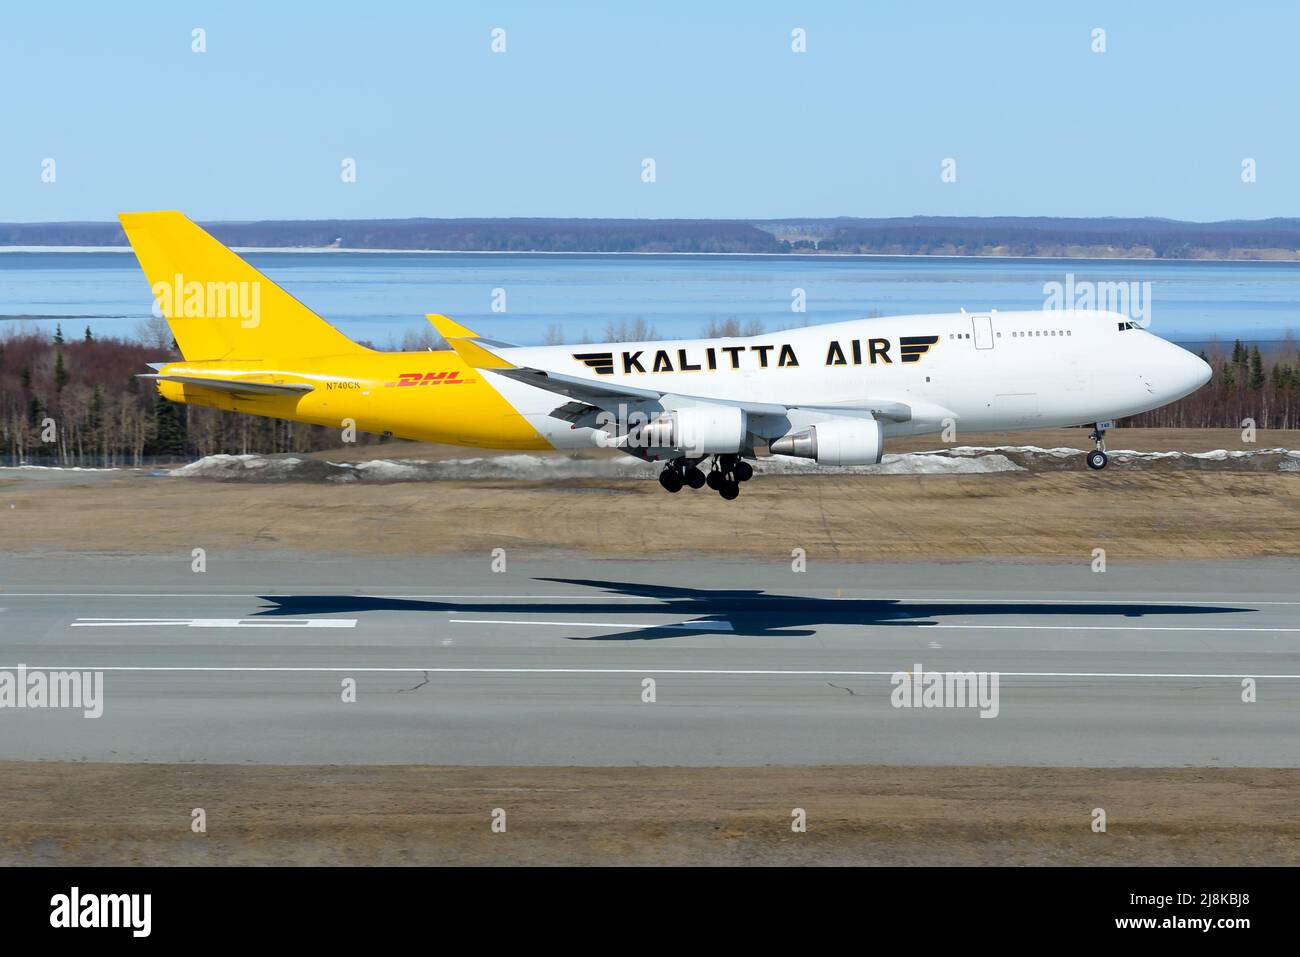 Kalitta Air Boeing 747-400F airplane landing. Plane 747-400 for cargo transport of DHL Kalitta Air arriving. Aircraft 747-400 freighter N740CK for DHL. Stock Photo